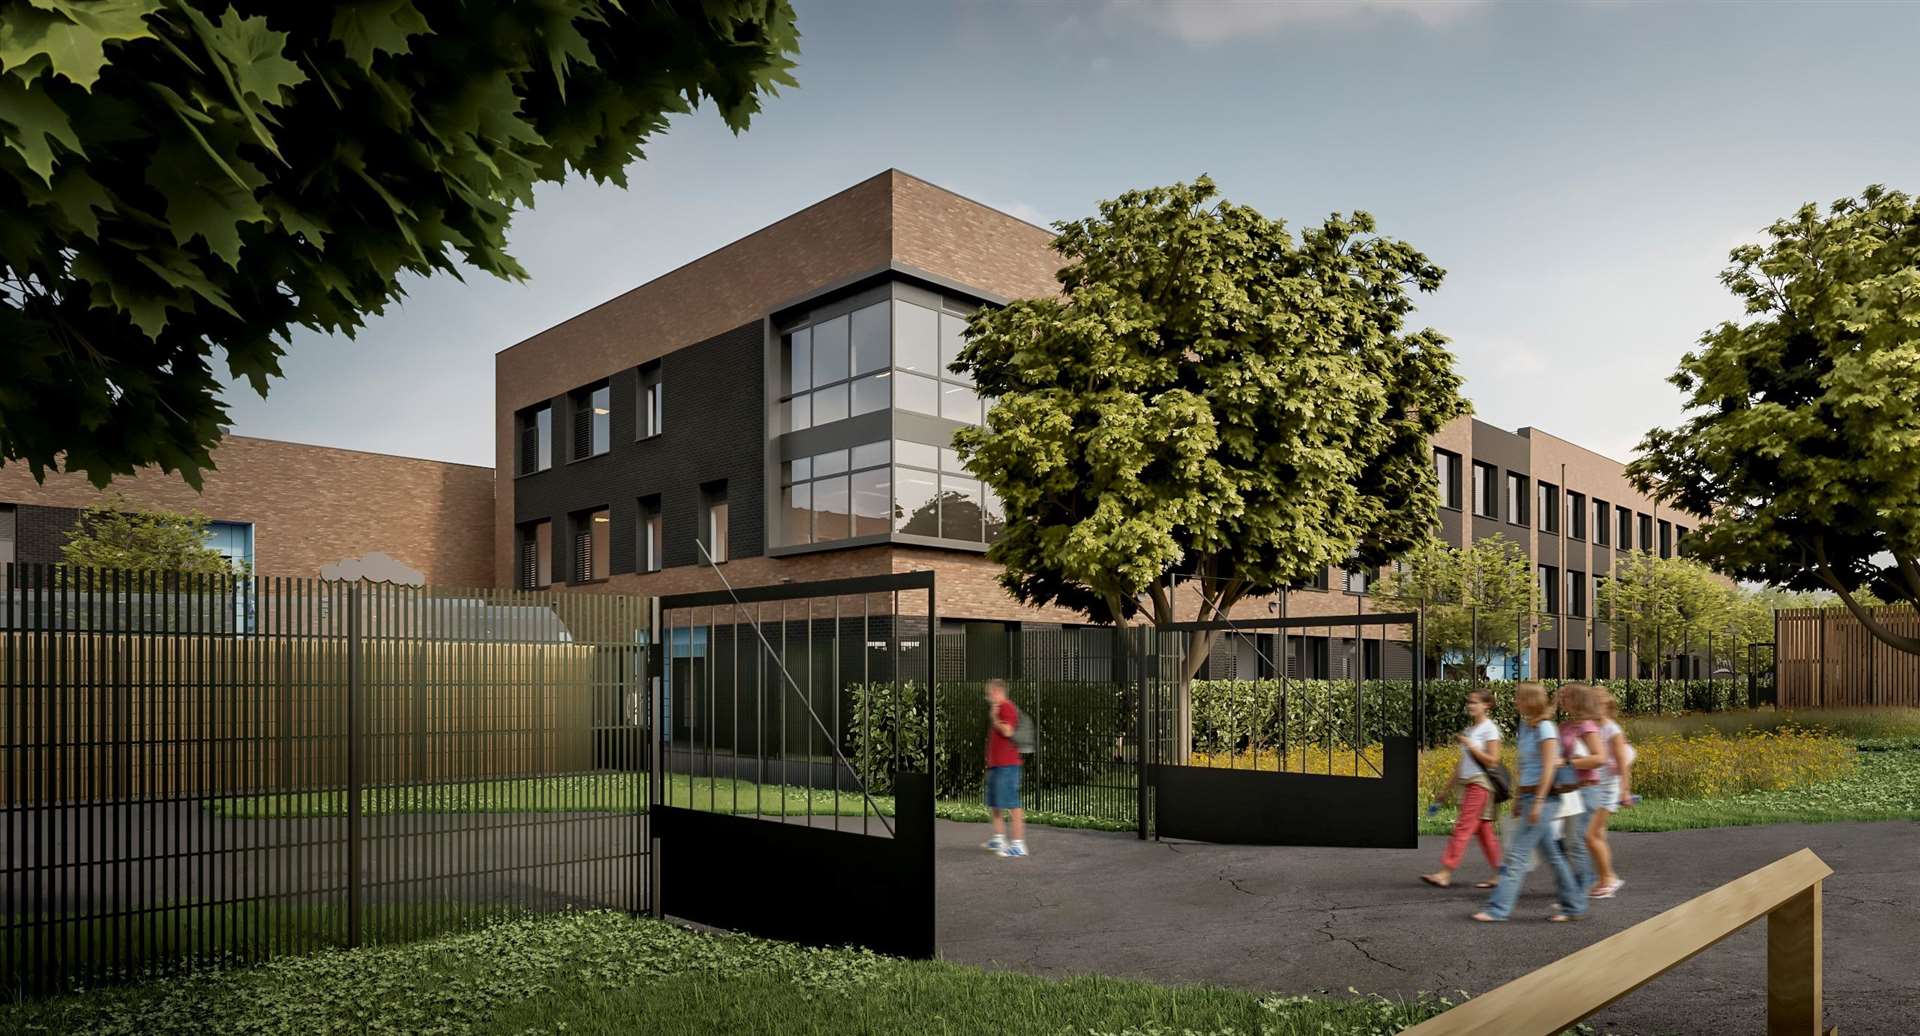 The redevelopment of Orchards Academy is part of a major rebuilding programme set out by the government. Photo: Bond Bryan Architects and the Department for Education